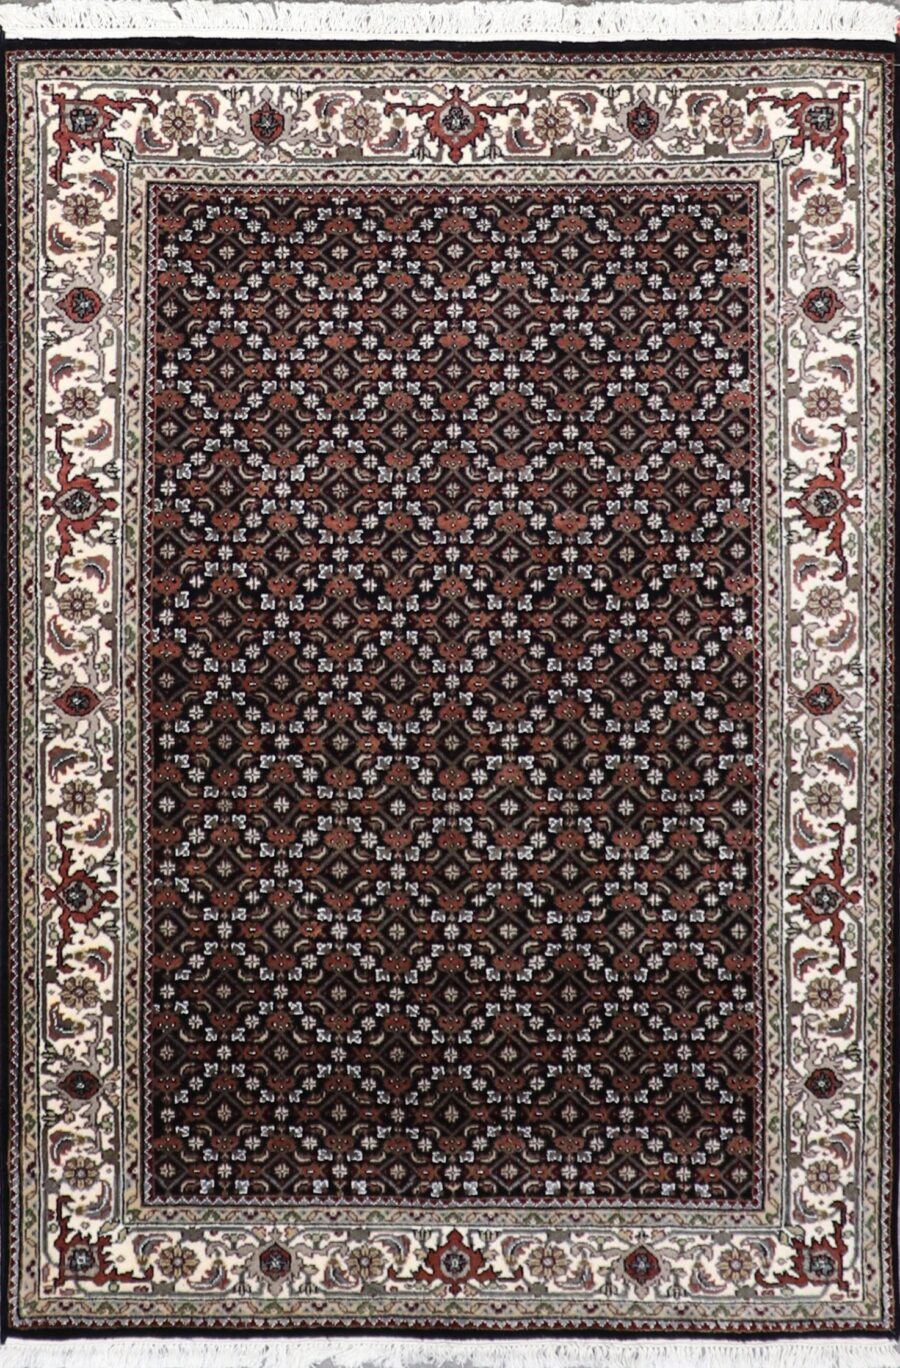 4’1”x6’1”Traditional Bijar Black Wool Hand-Knotted Rug - Direct Rug Import | Rugs in Chicago, Indiana,South Bend,Granger